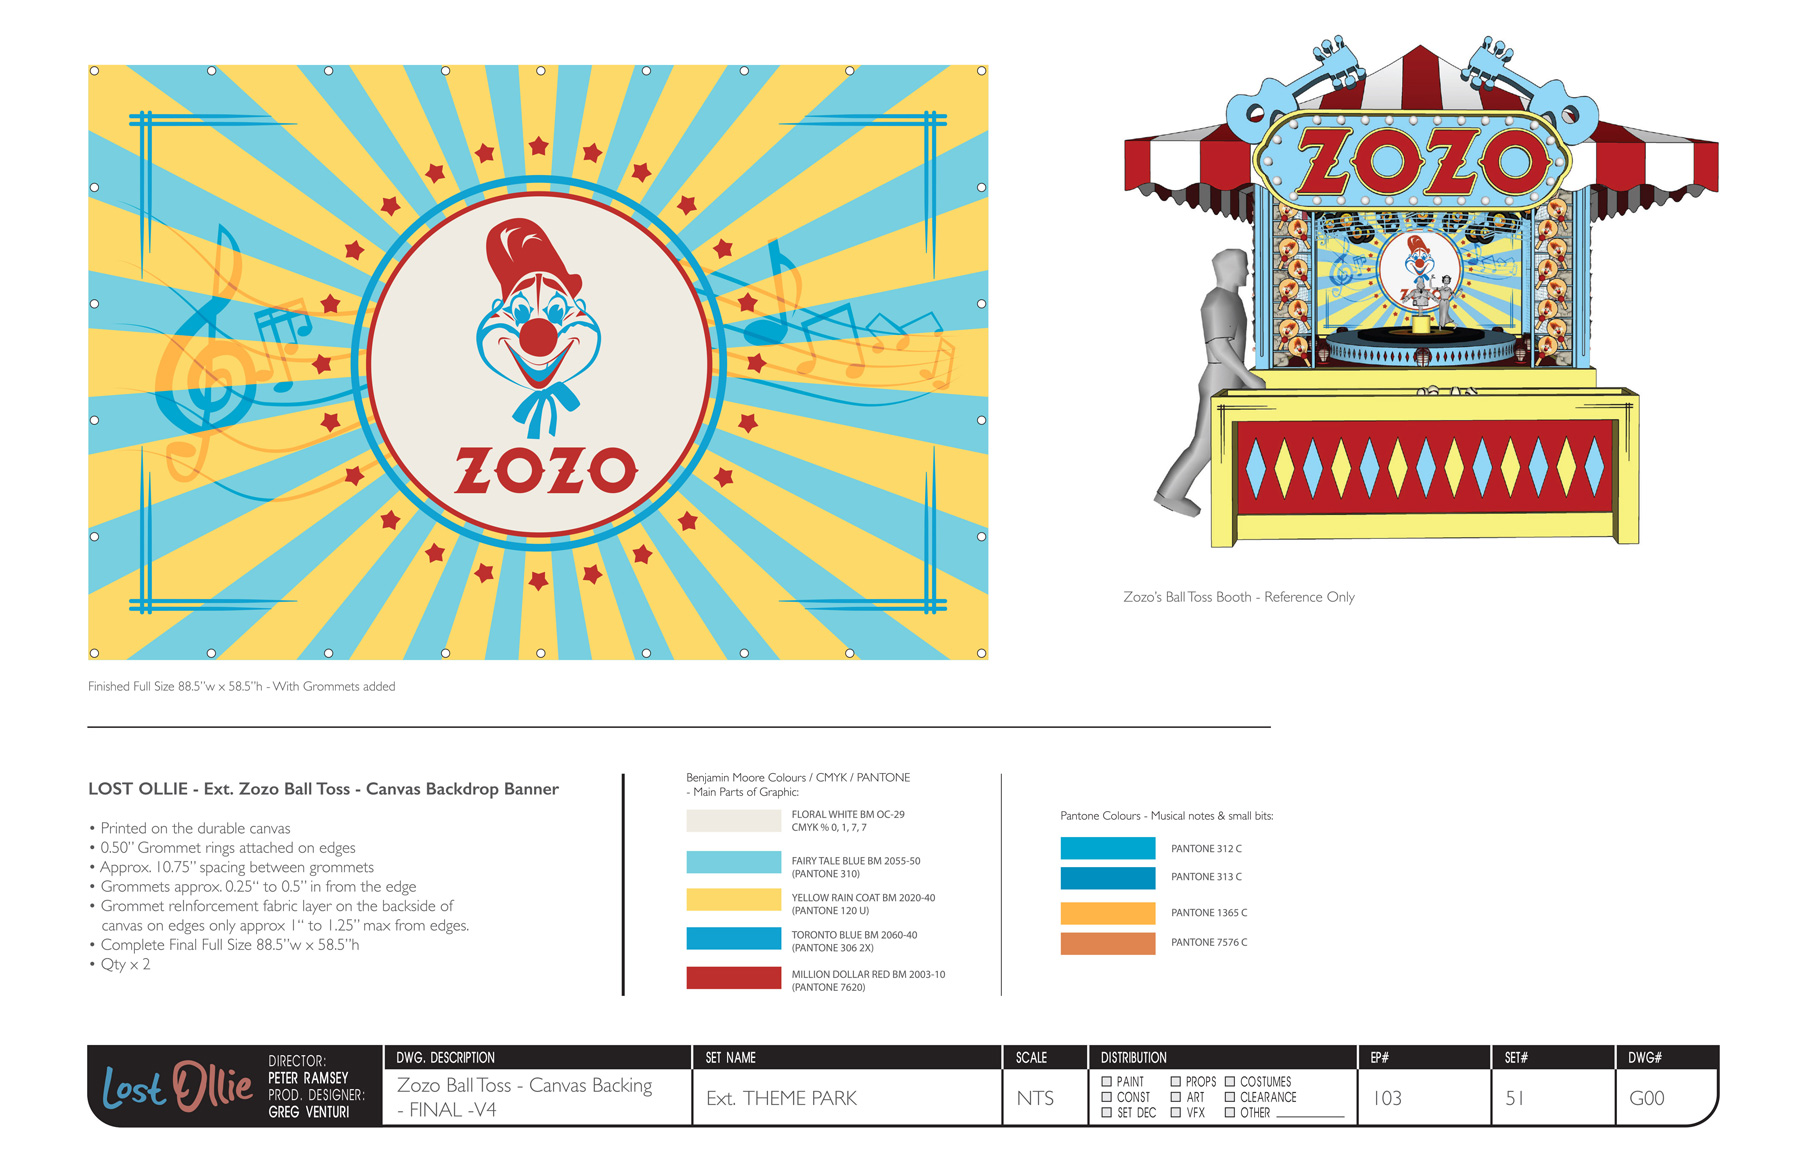 26 Lost Ollie 'Dreamland Amusement Park' Zozo's Ball Toss Booth Location Install Gfx For Booth